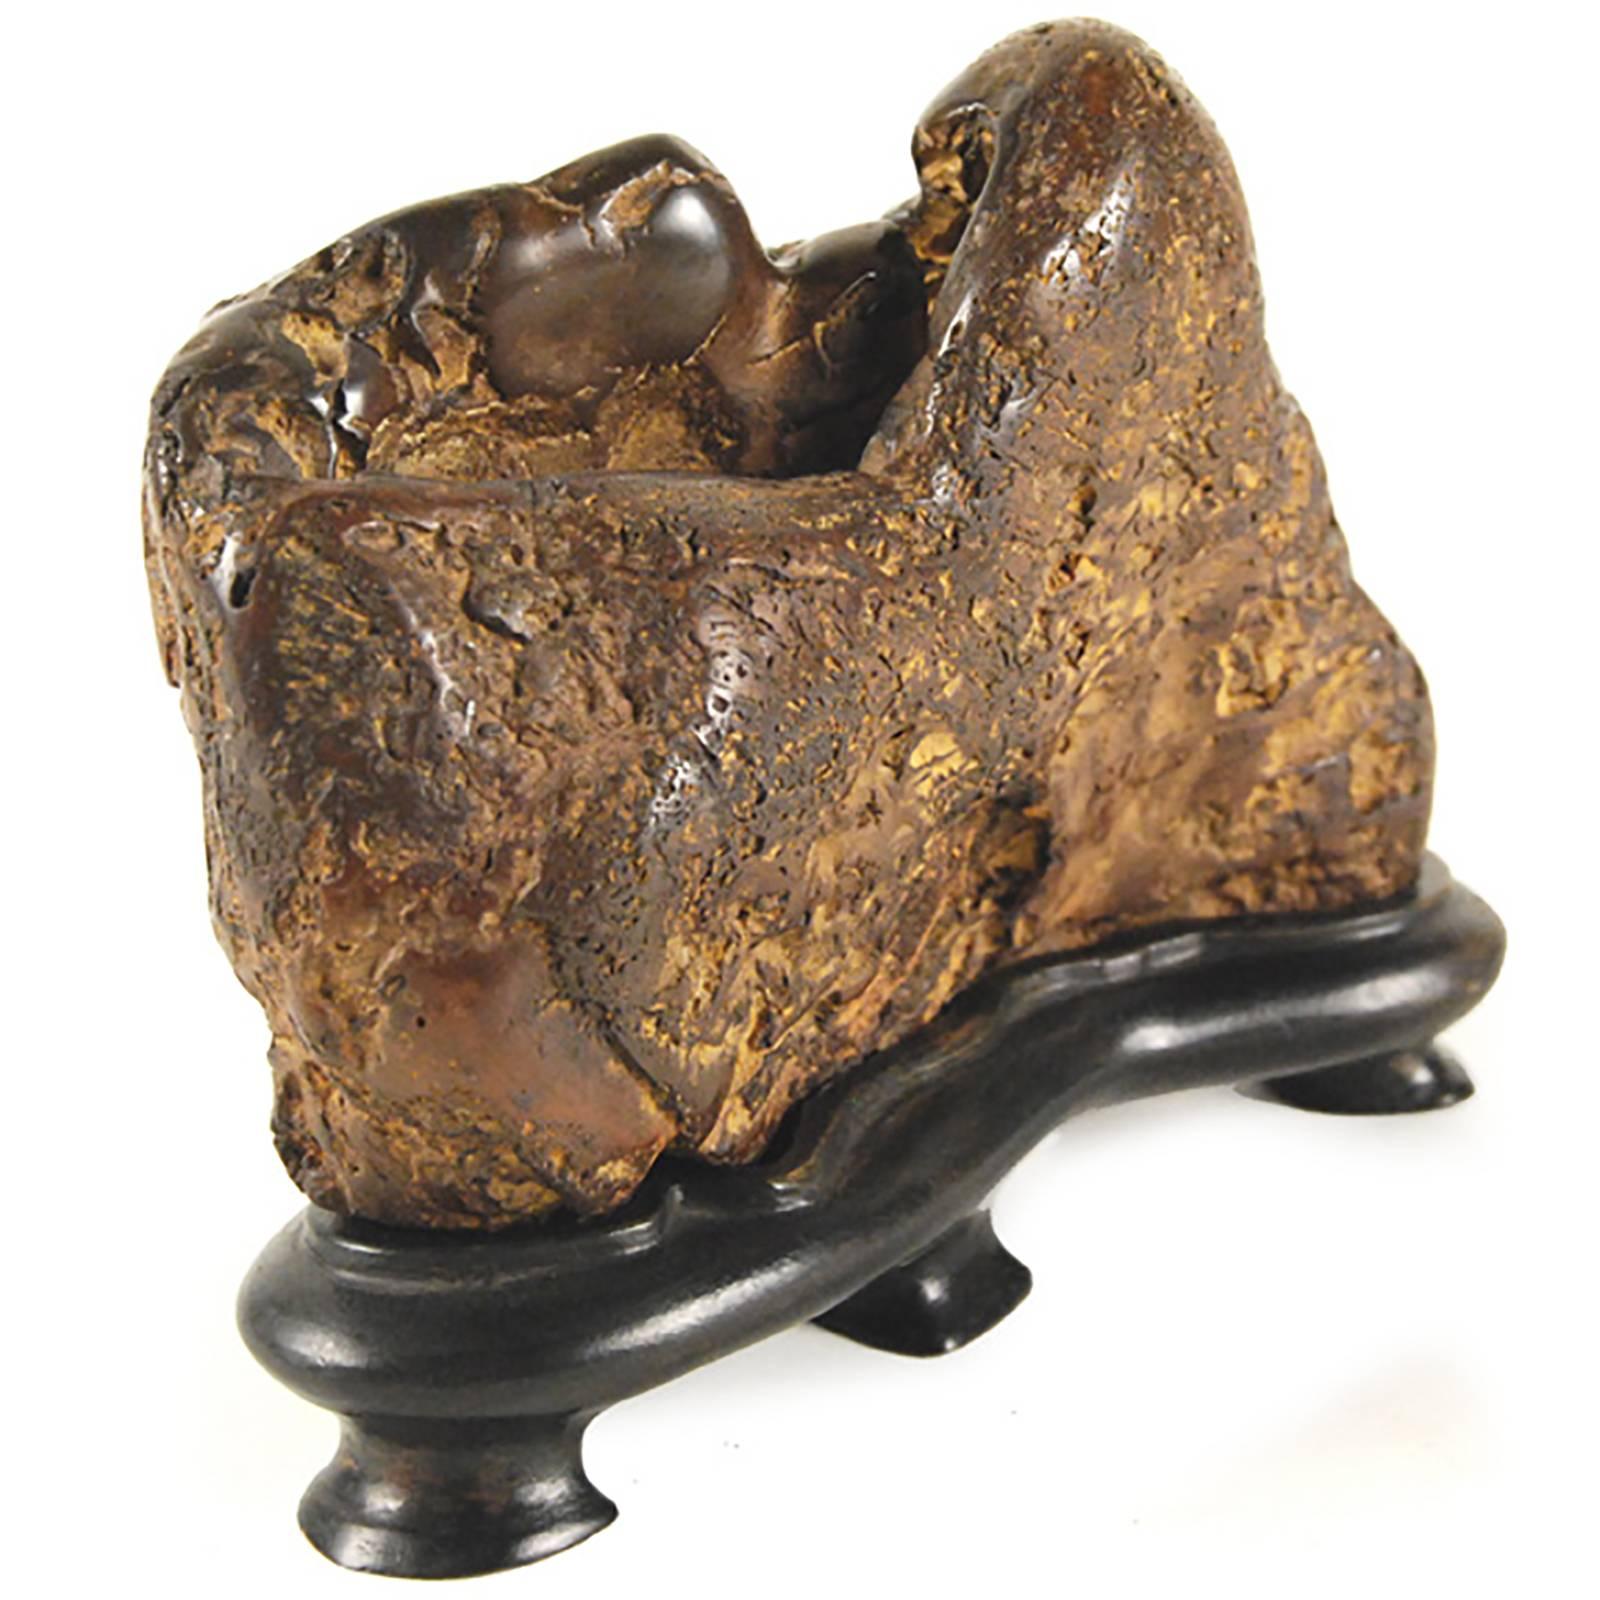 A Qing-dynasty scholar would have used this organically shaped brush washer to rinse the ink from his calligraphy brush. Made of jasper, the vessel’s naturally gnarled shape showcases the stone’s speckled appearance. Such novelties inspired scholars